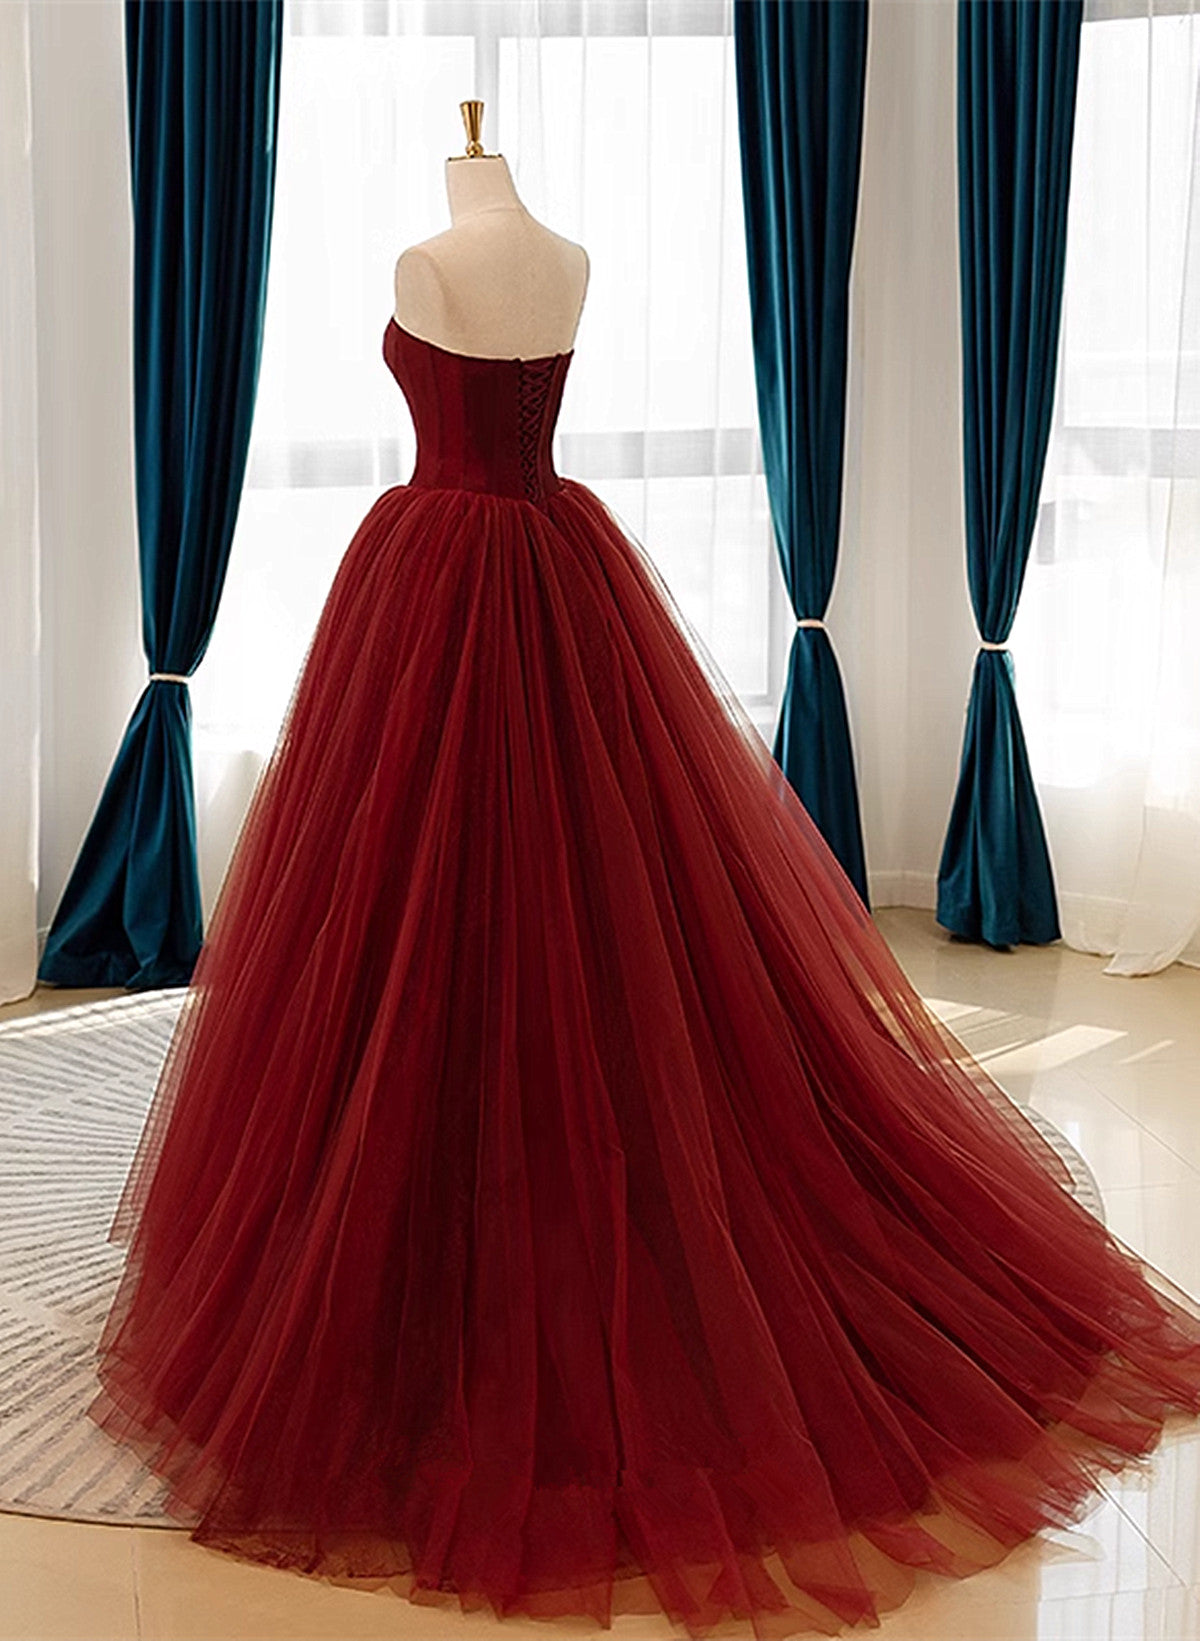 Wine Red Tulle Scoop Long Formal Dress, Wine Red Tulle Prom Dress Party Dress